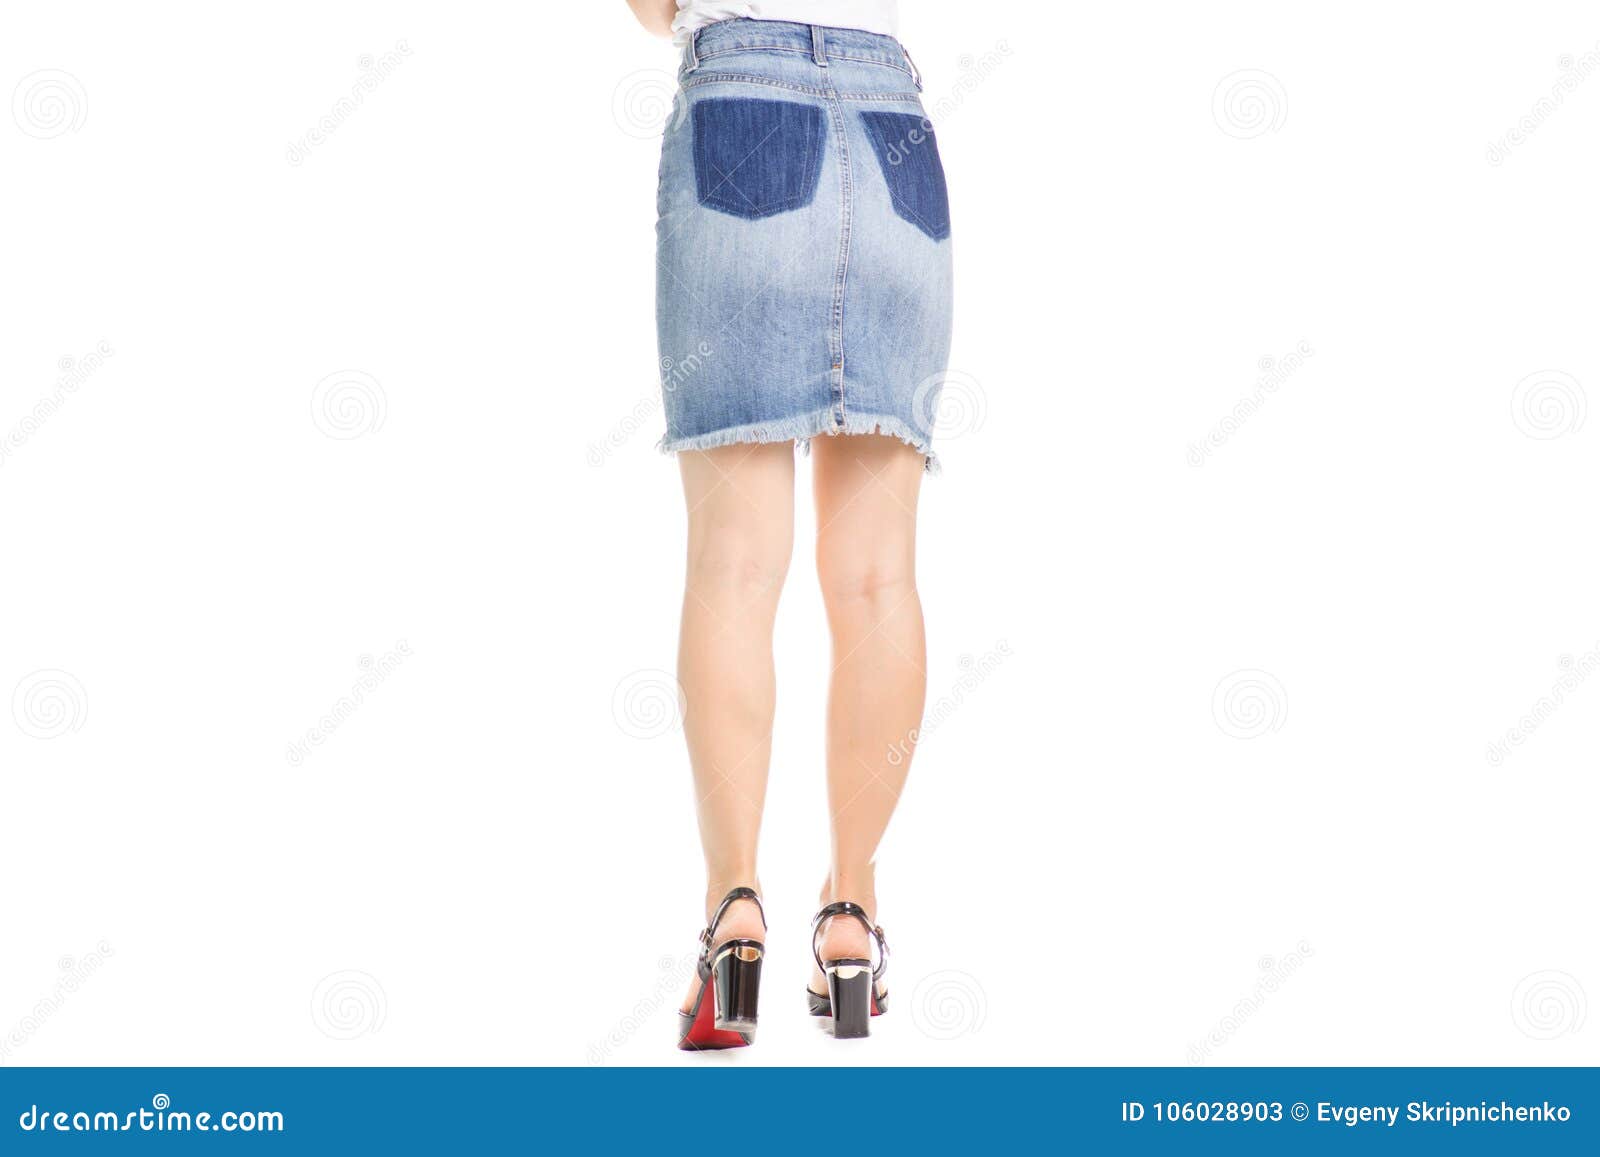 Legs in Shoes Young Girl Denim Skirt Stock Image - Image of flower ...